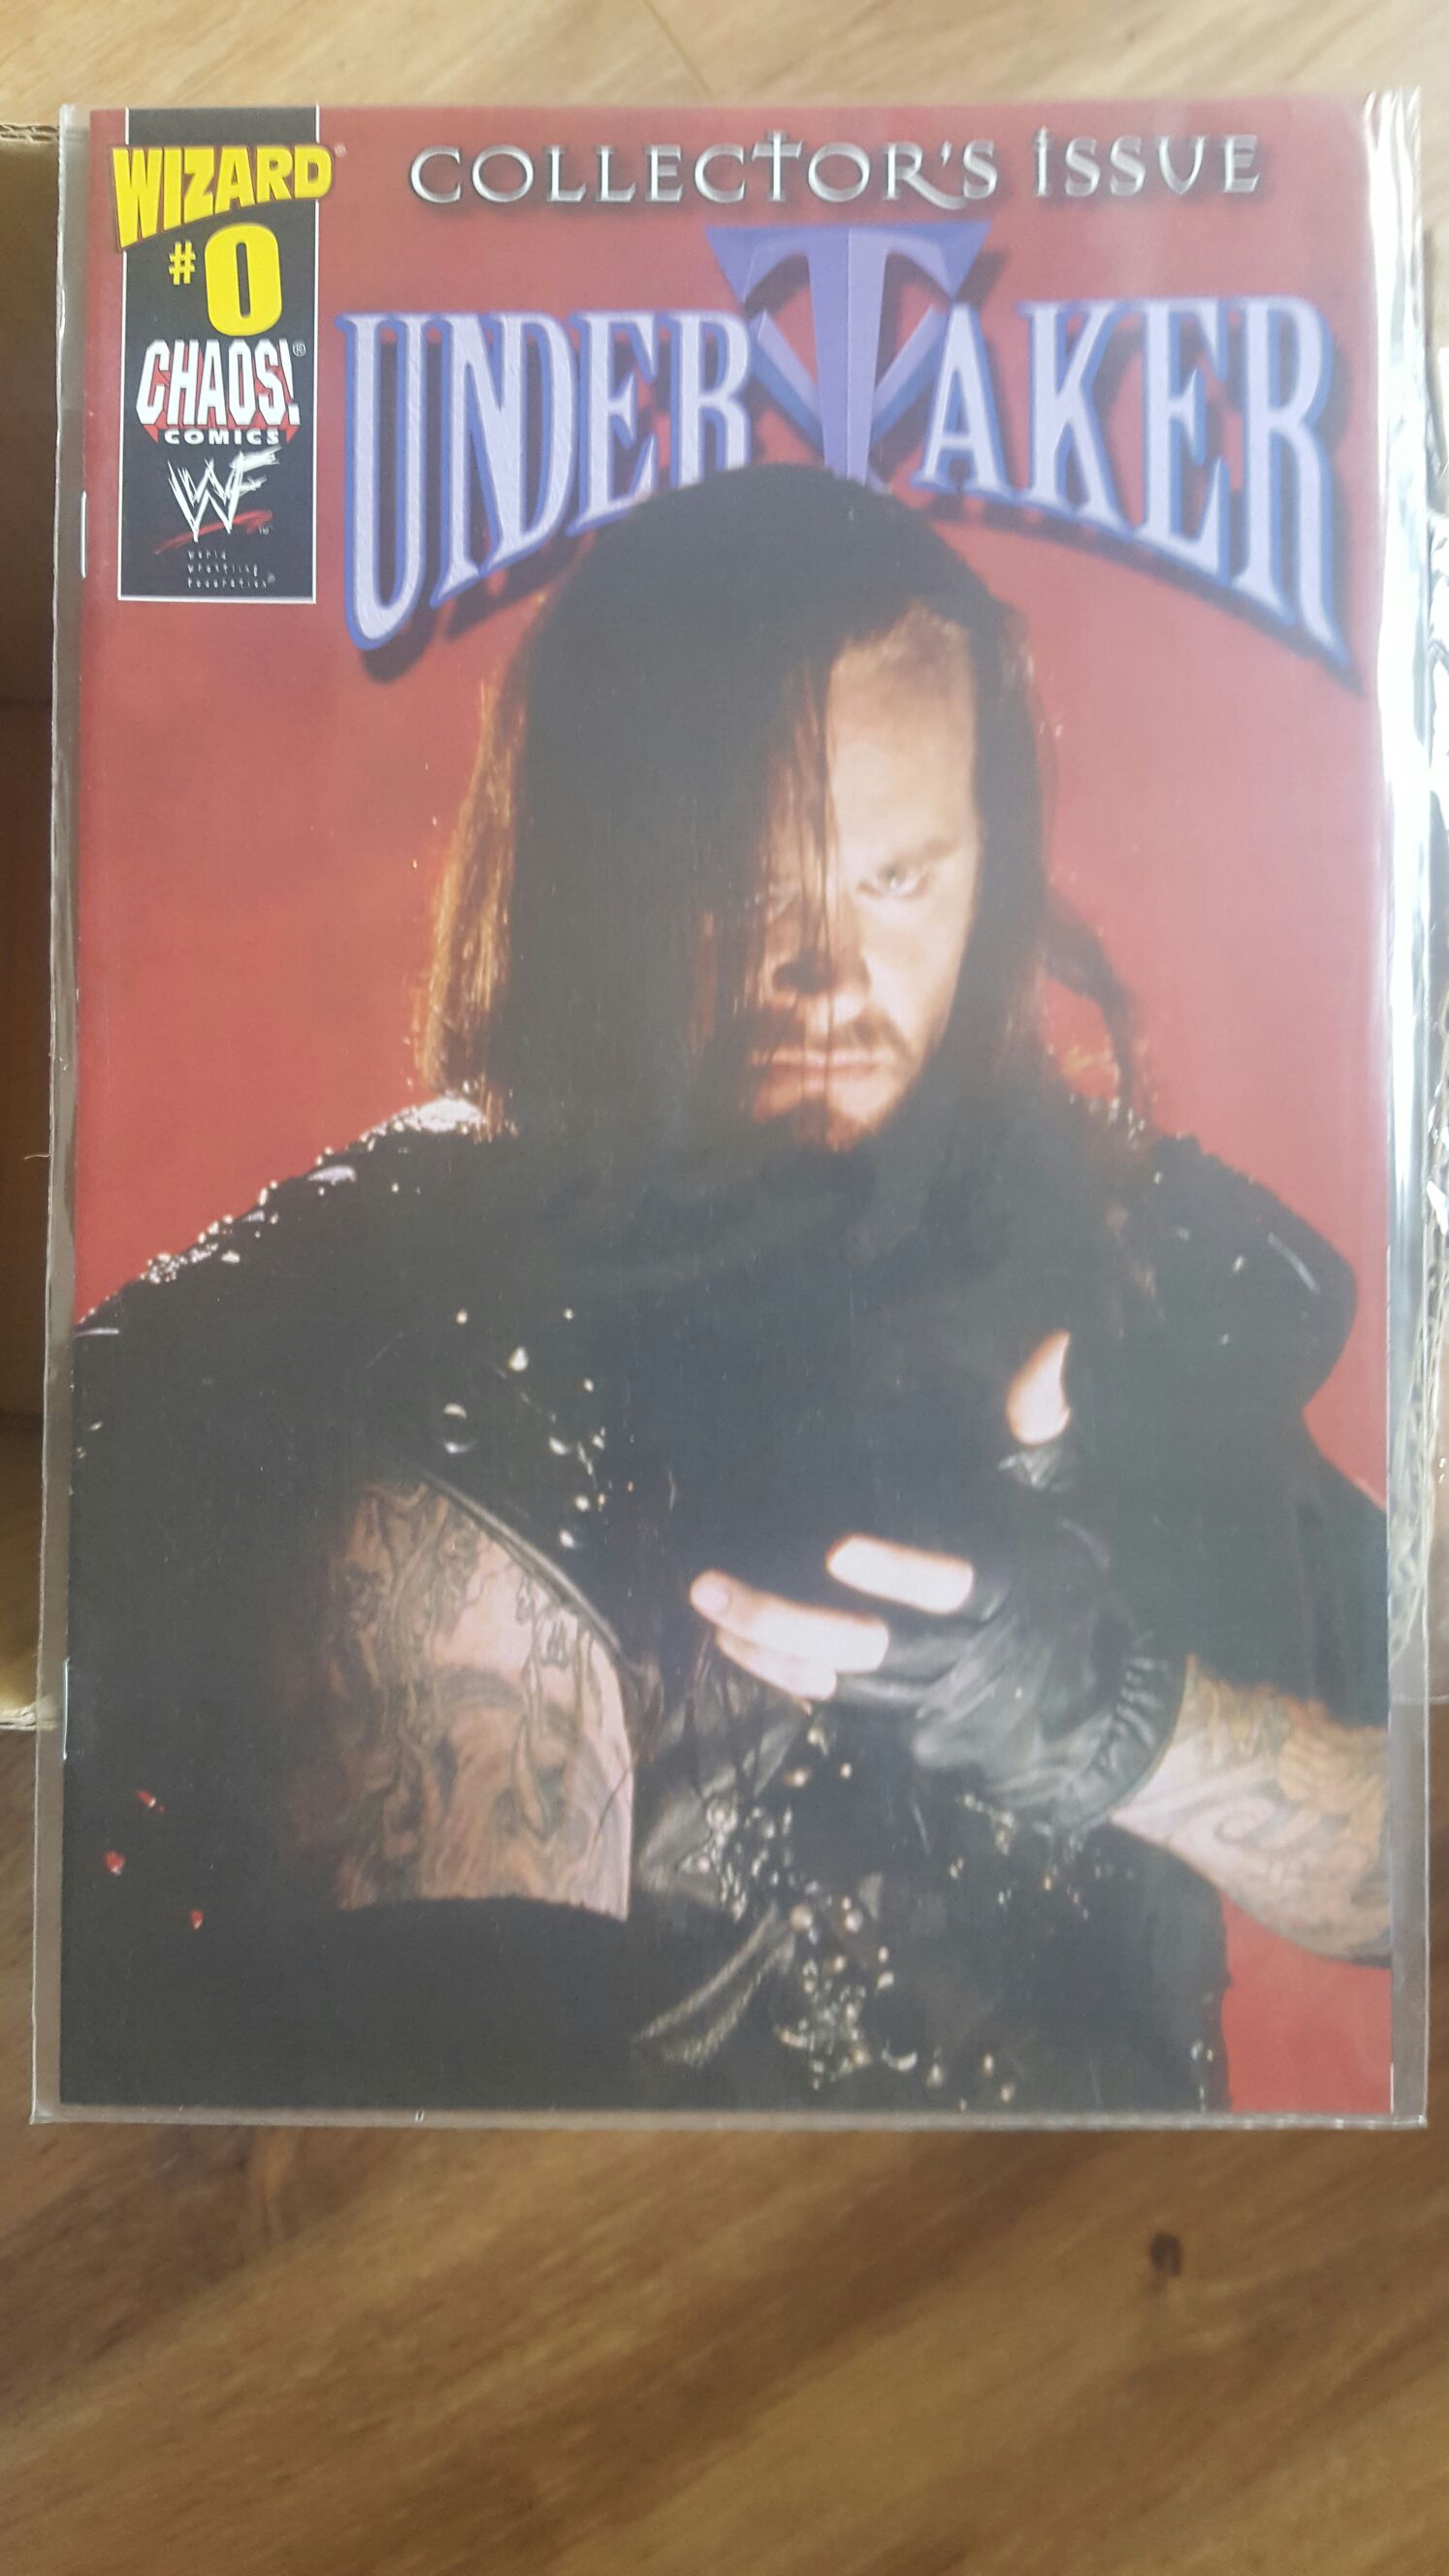 Undertaker - Chaos Comics/World Wrestling Federation (0) comic book collectible - Main Image 1